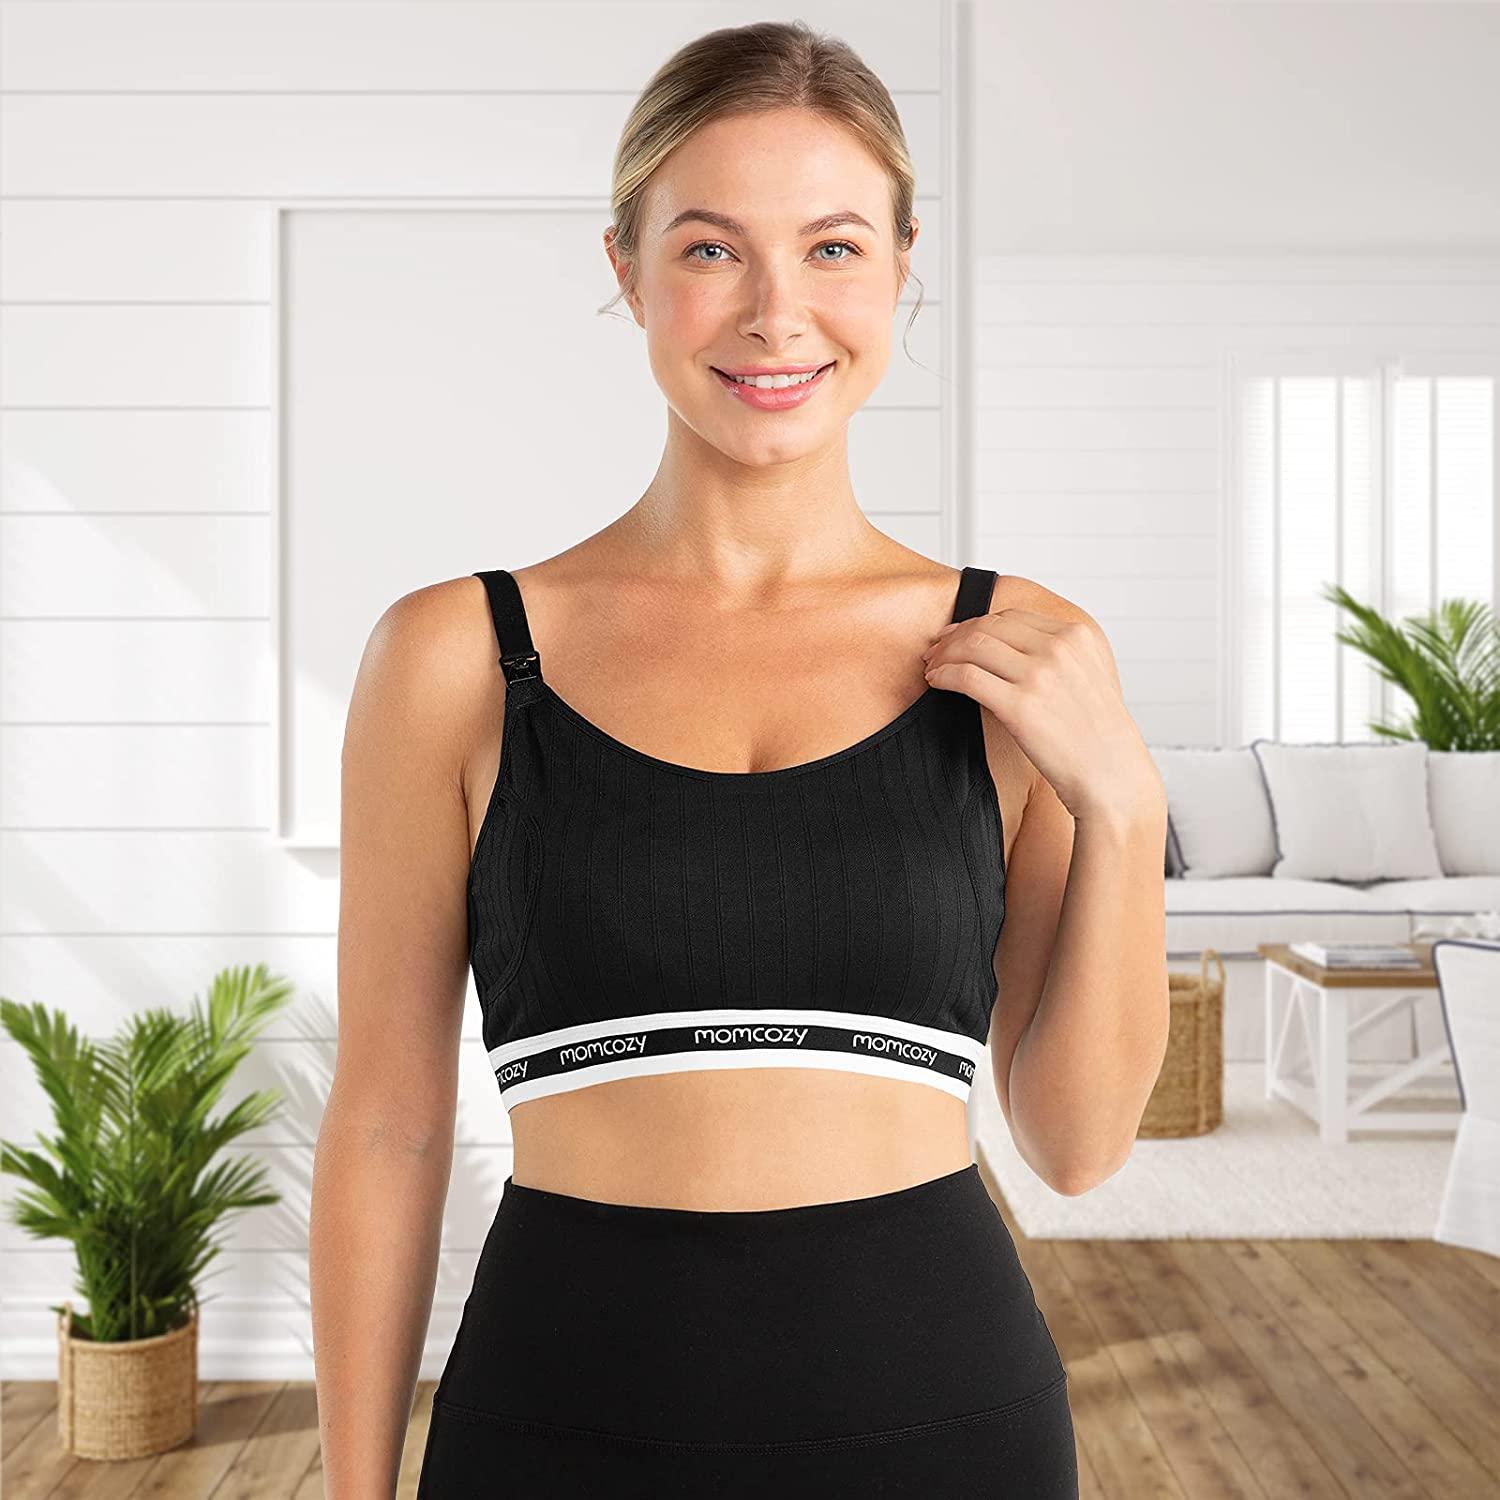 Momcozy Lycra Pumping Bra Hands Free with Fixed Padding for Good